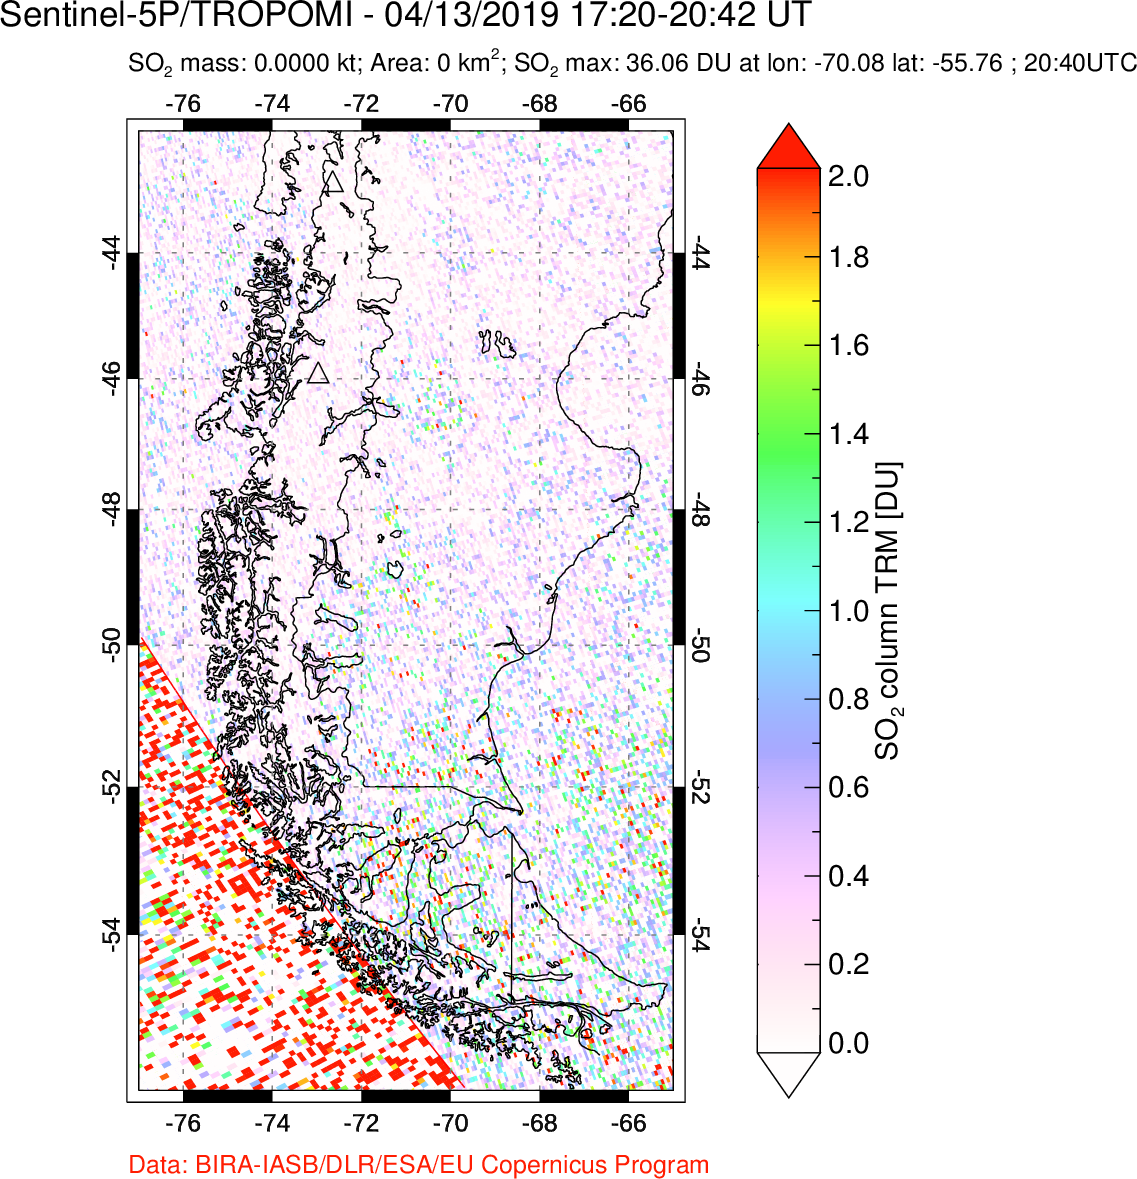 A sulfur dioxide image over Southern Chile on Apr 13, 2019.